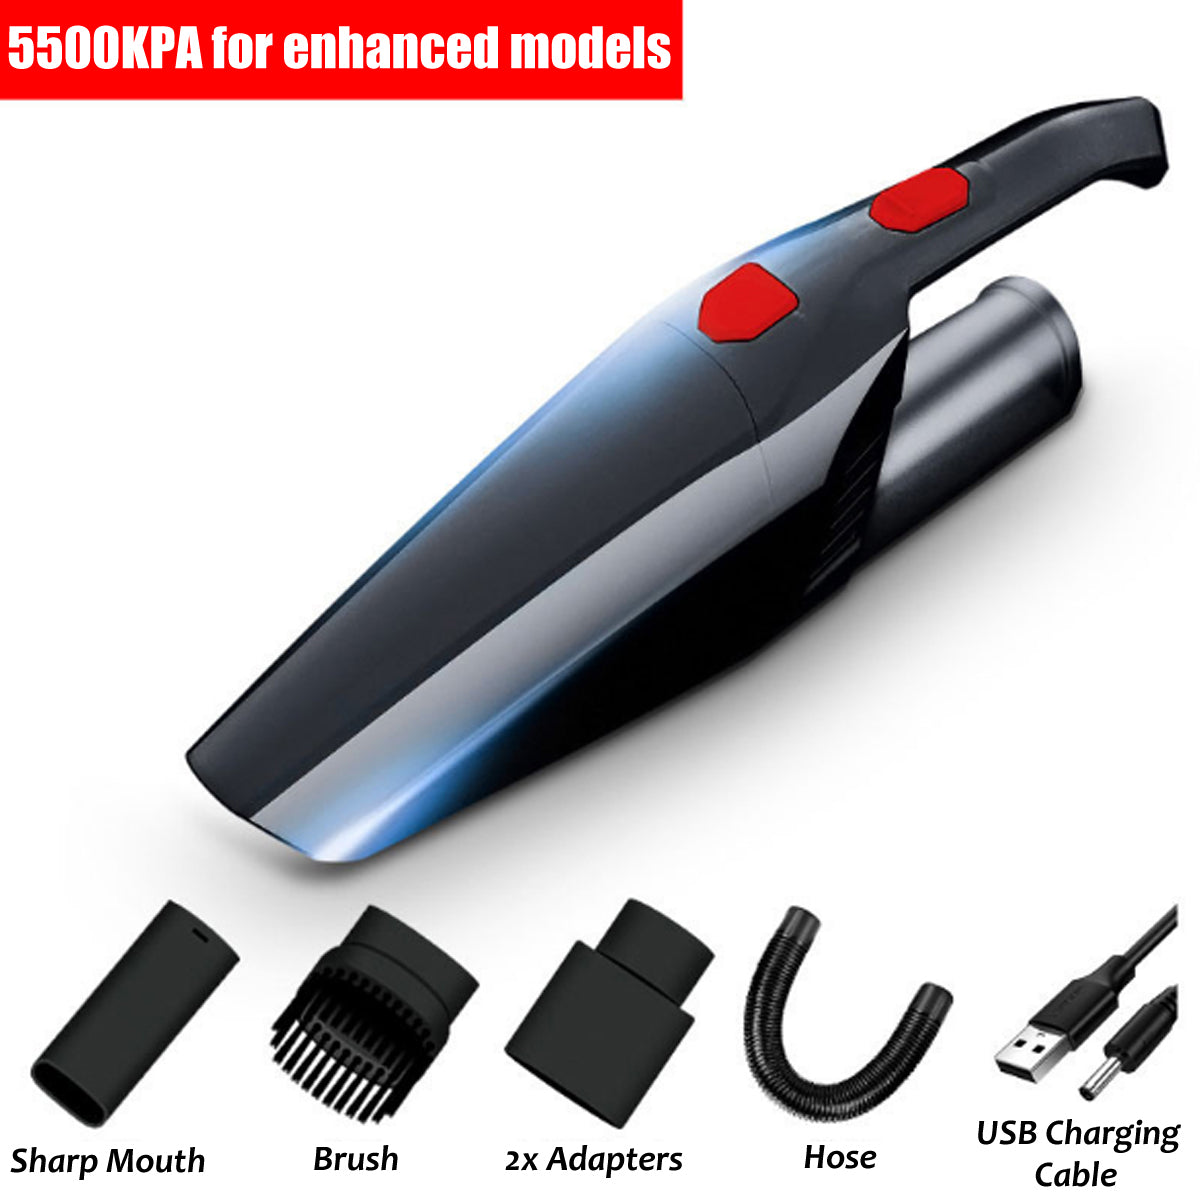 Car Vacuum Cleaner Wireless Handheld 120W Hand Held For Auto Dust Duster 12V - Auto GoShop